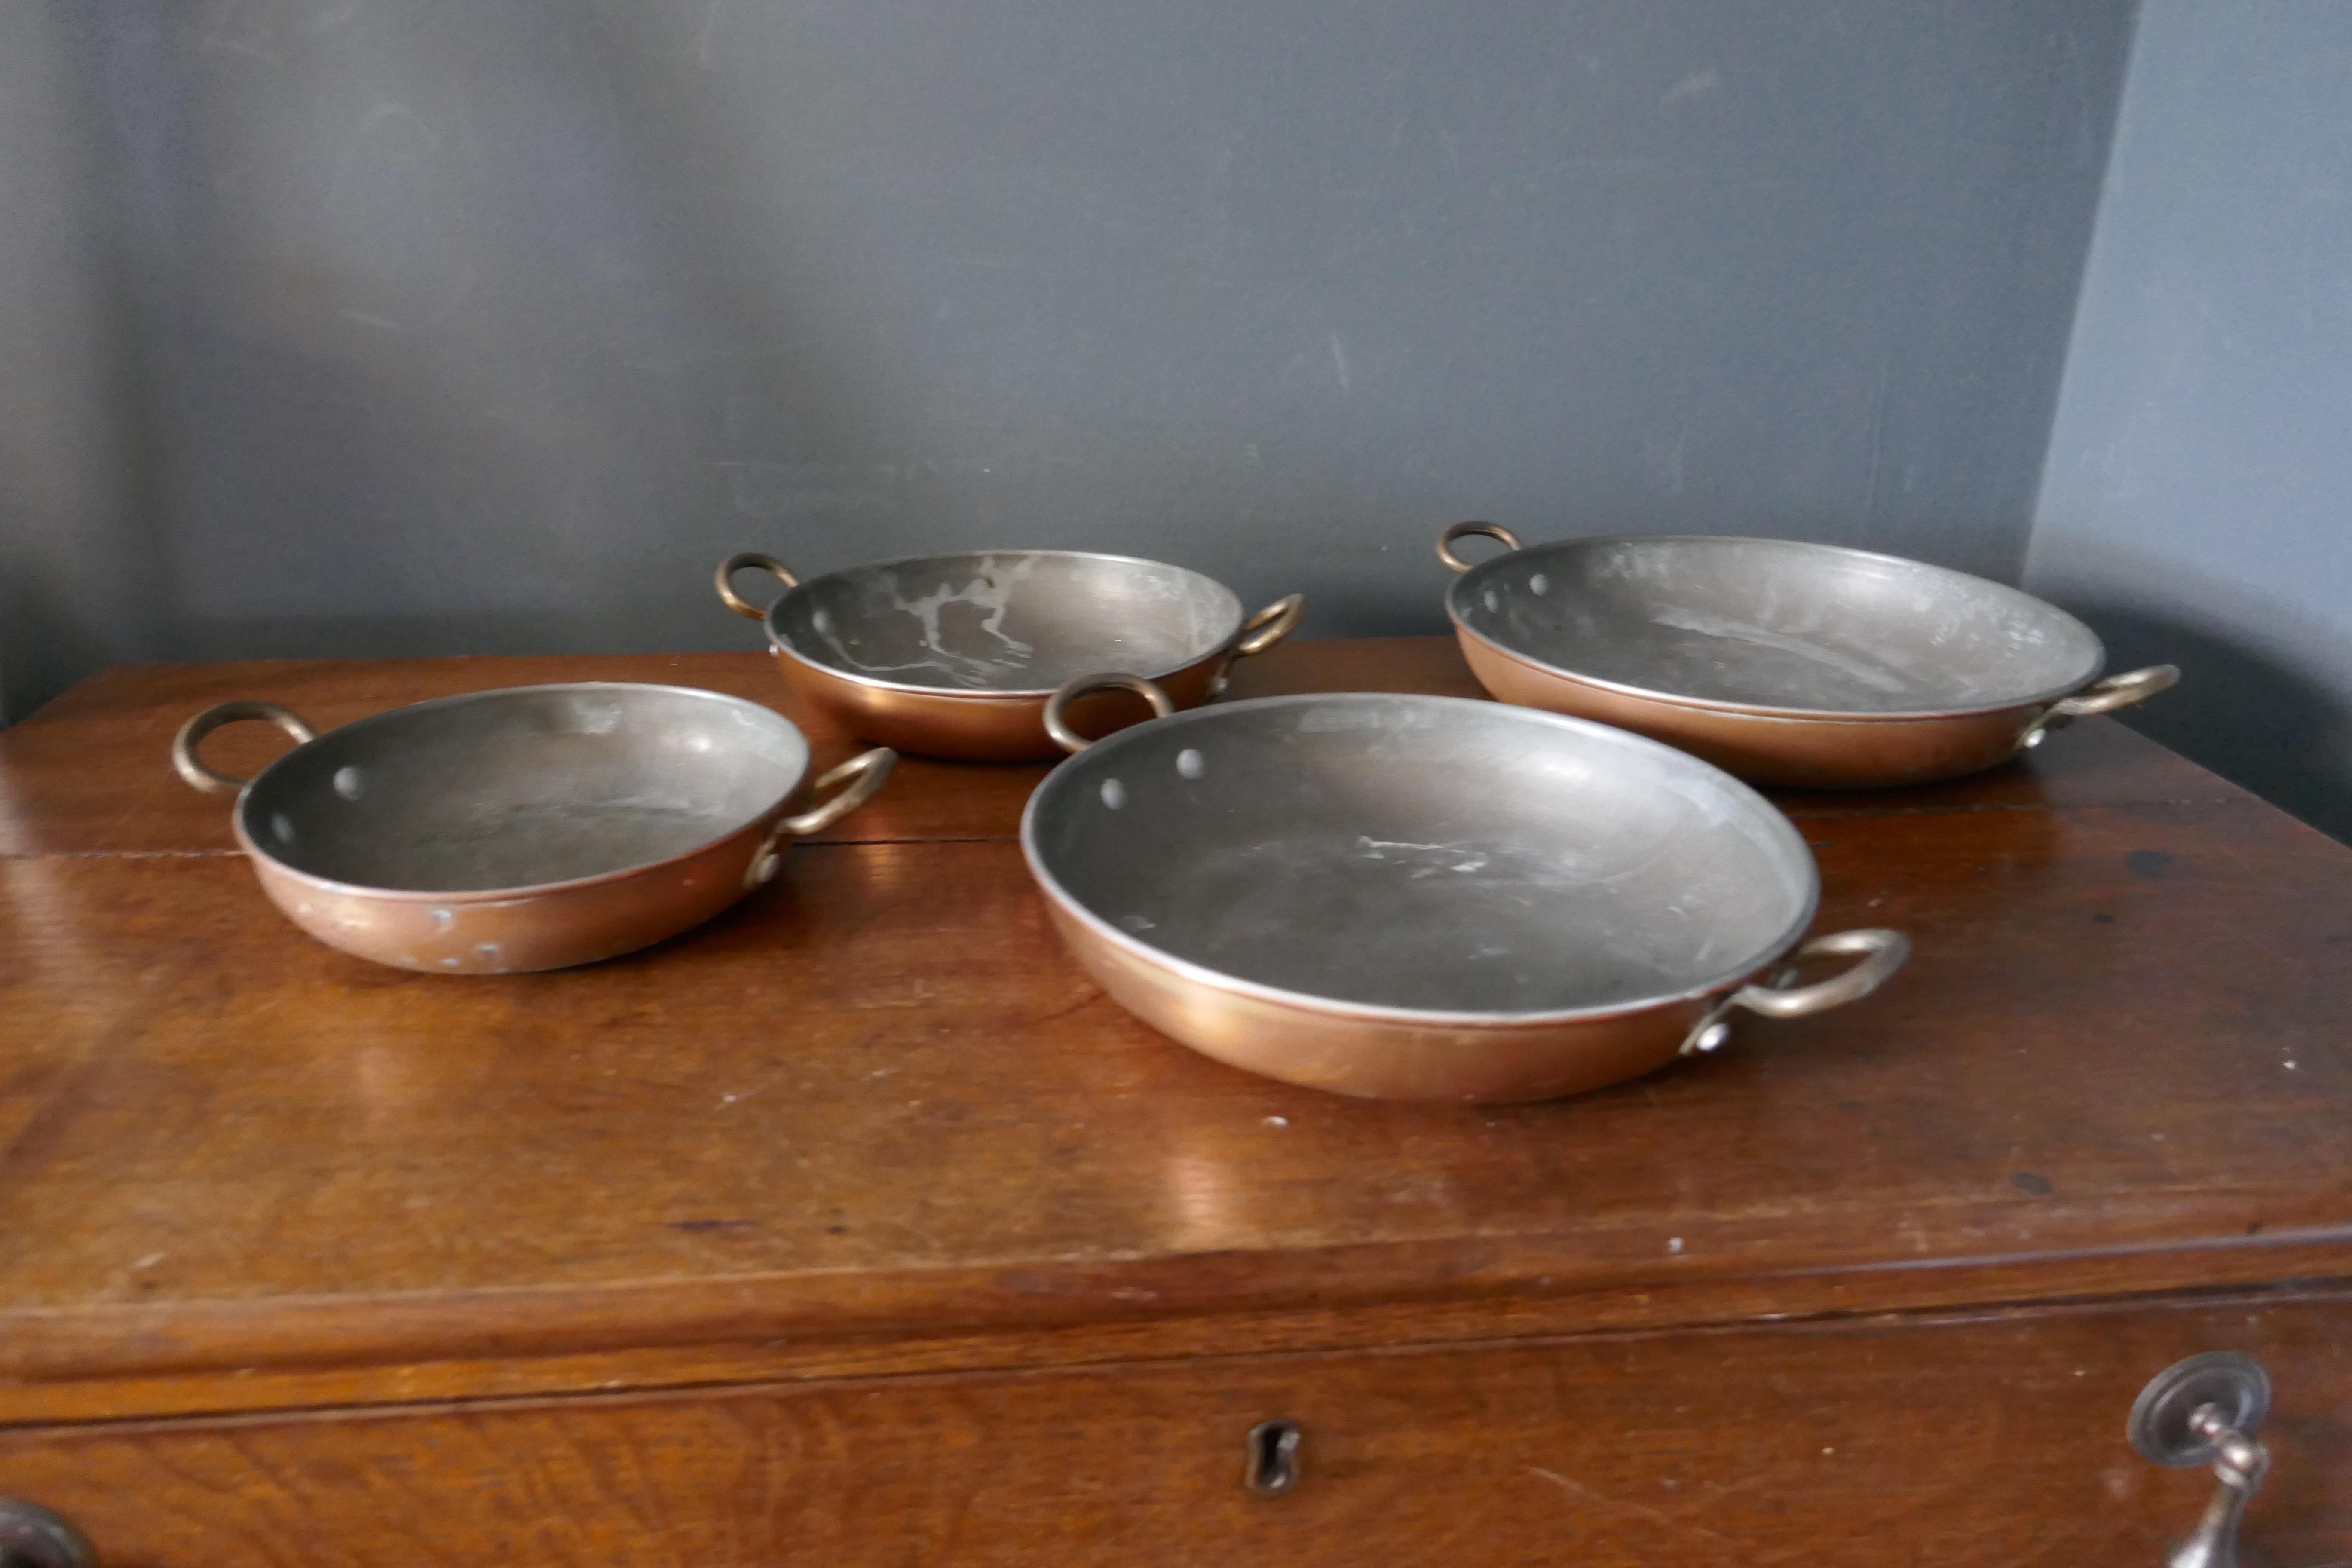 Set of 4 French copper skillet, grattan dishes

A very useful and decorative set of French copper grattan dishes
The skillets are made in copper which has been tinned on the inside and they each have 2 riveted brass handles
The dishes are all in